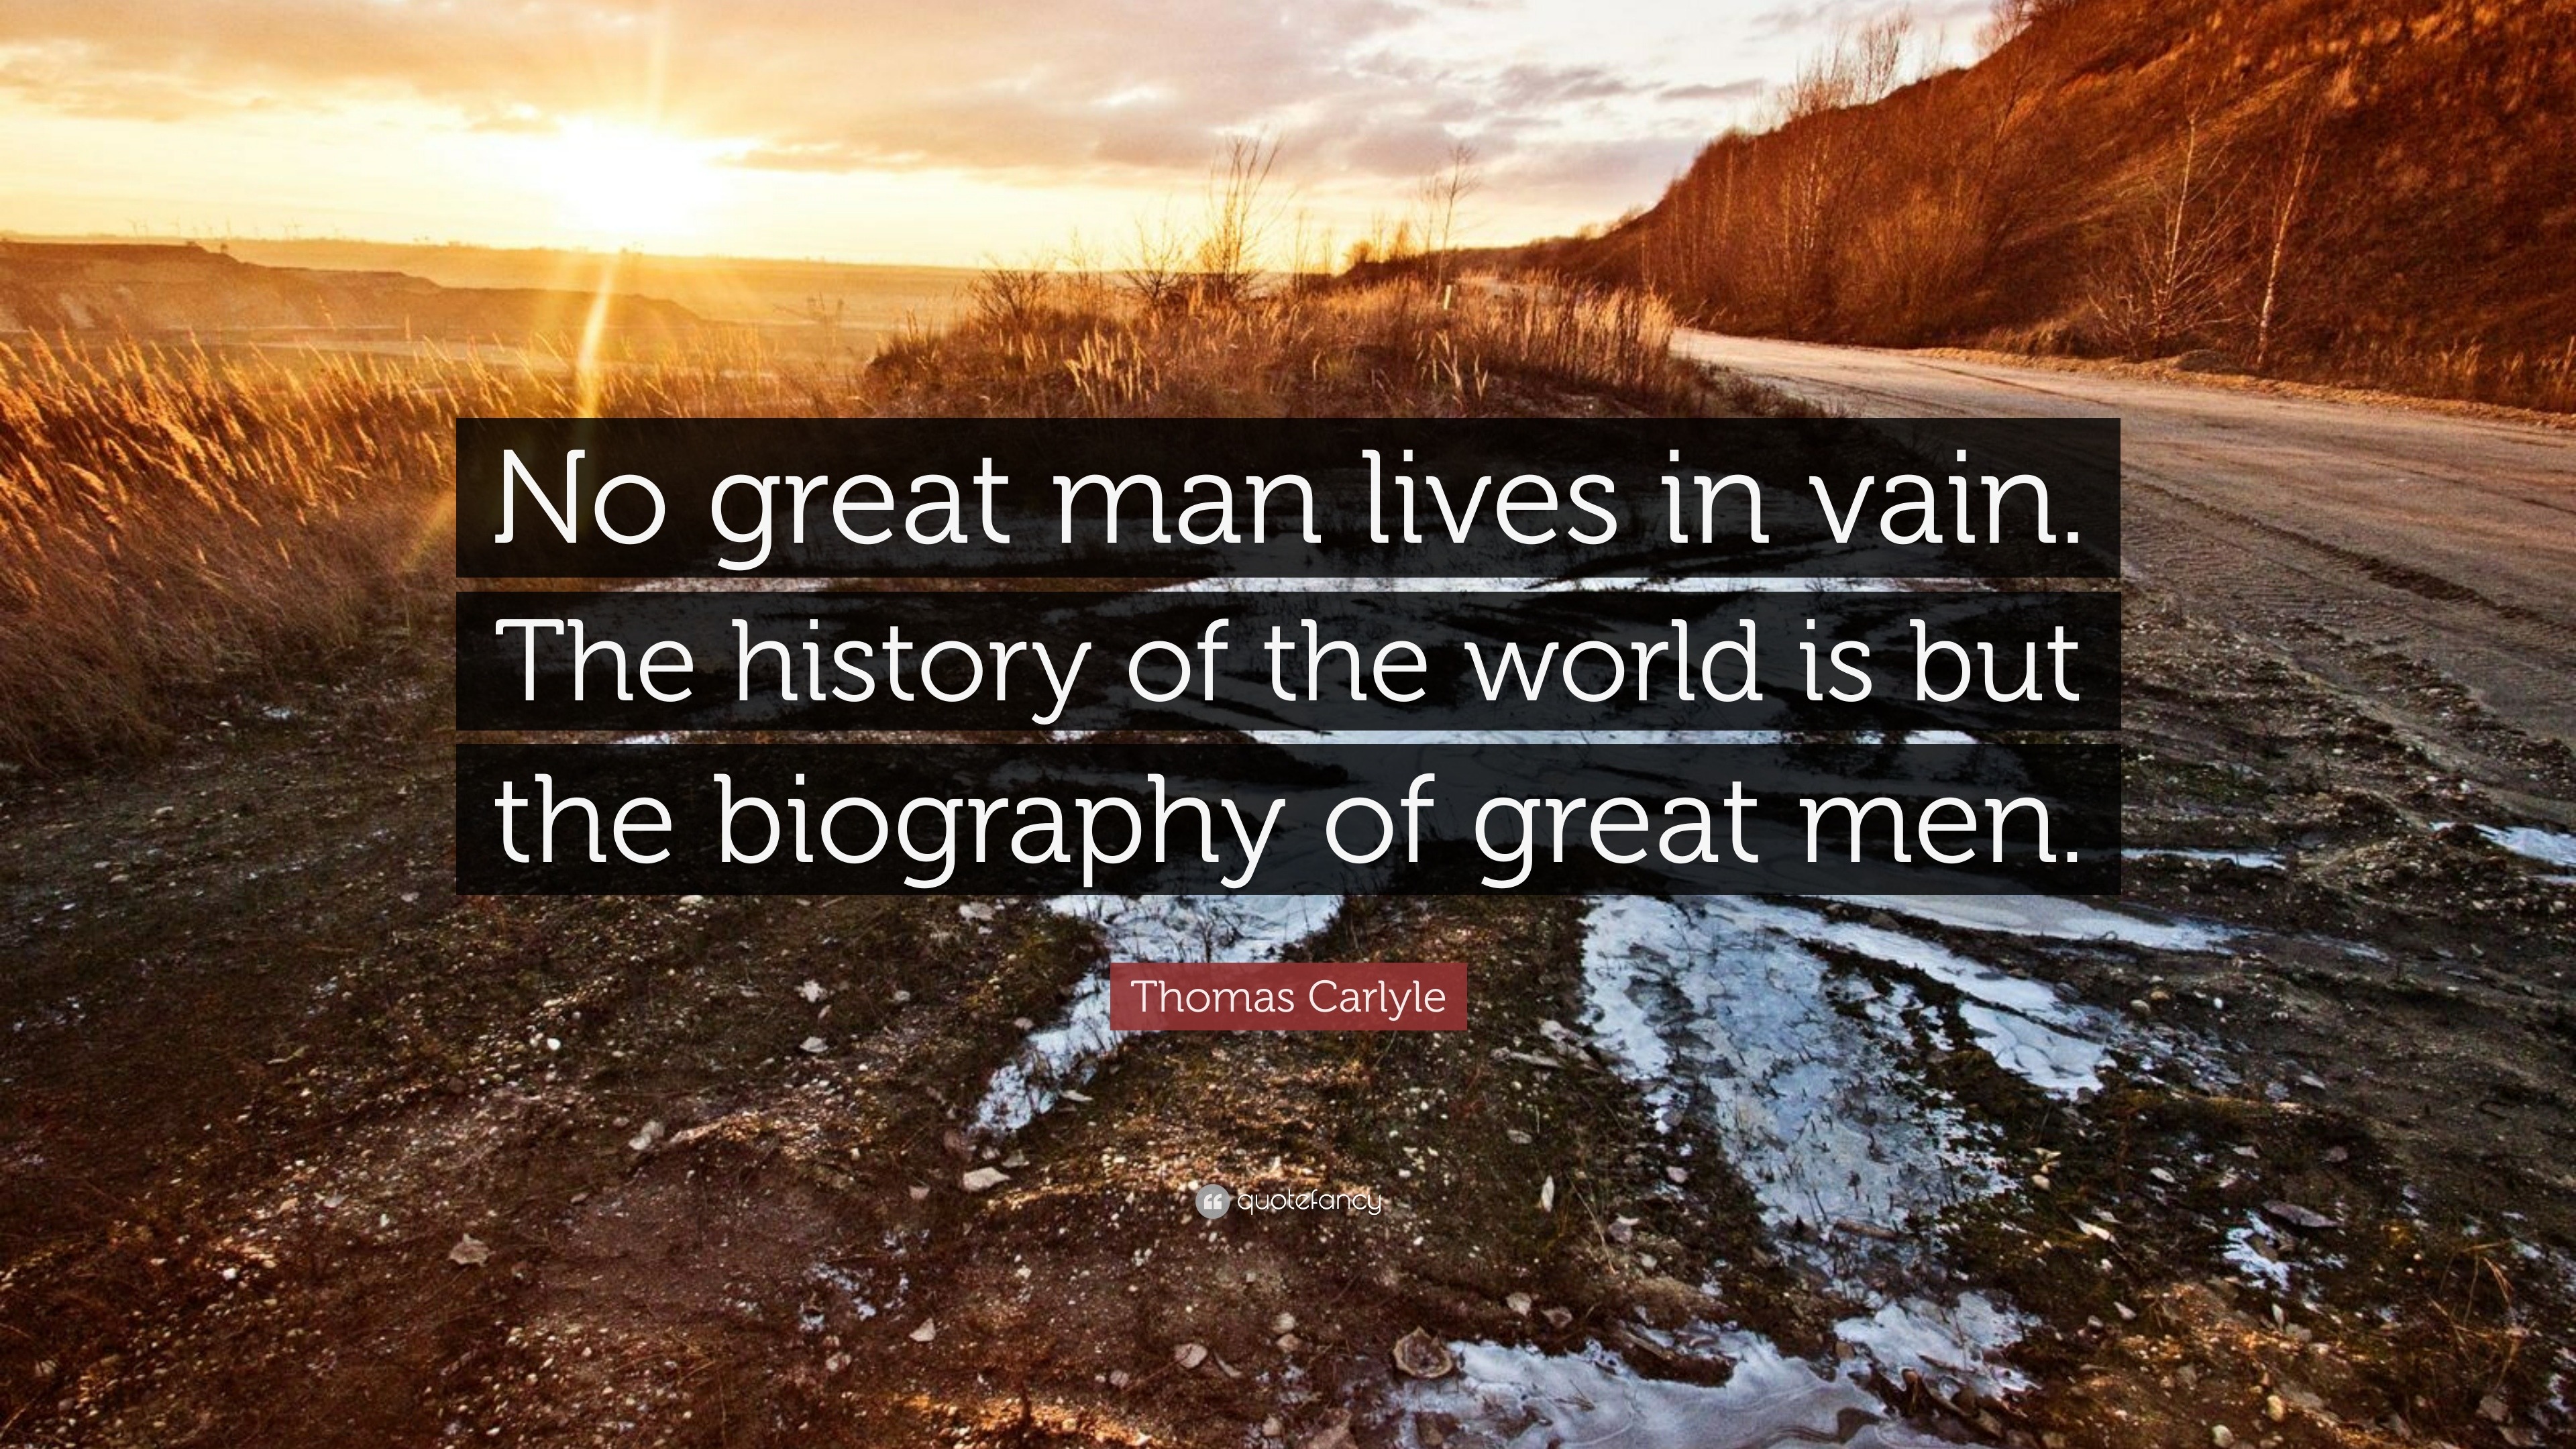 quotes on great biography